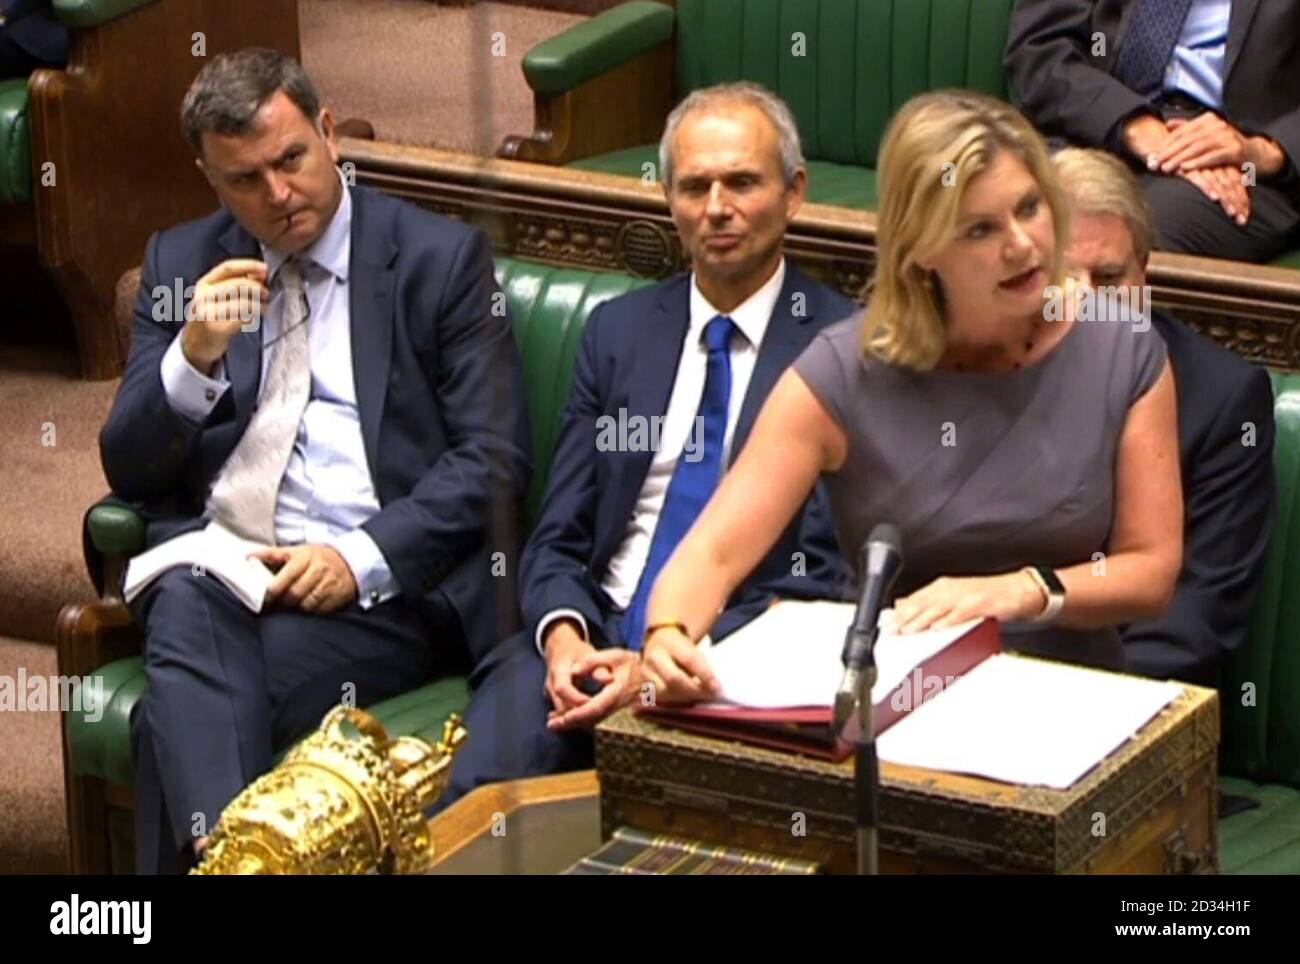 Education secretary Justine Greening speaks in the House of Commons, London, on planned reforms to the school system. Stock Photo